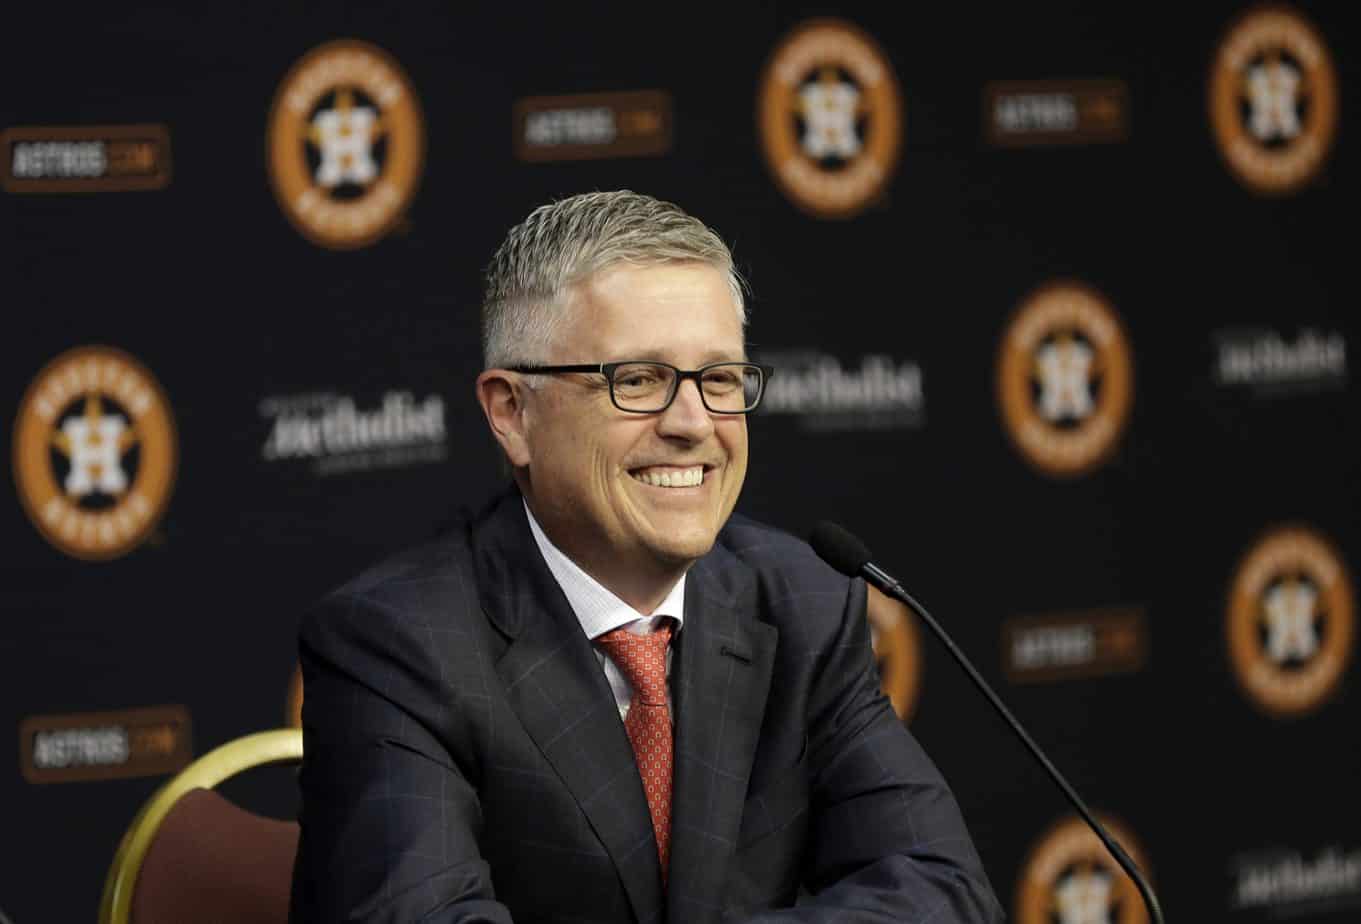 Former Astros general manager Jeff Luhnow takes to social media to send a message for the first time since he was fired for his role in sign-stealing scandal